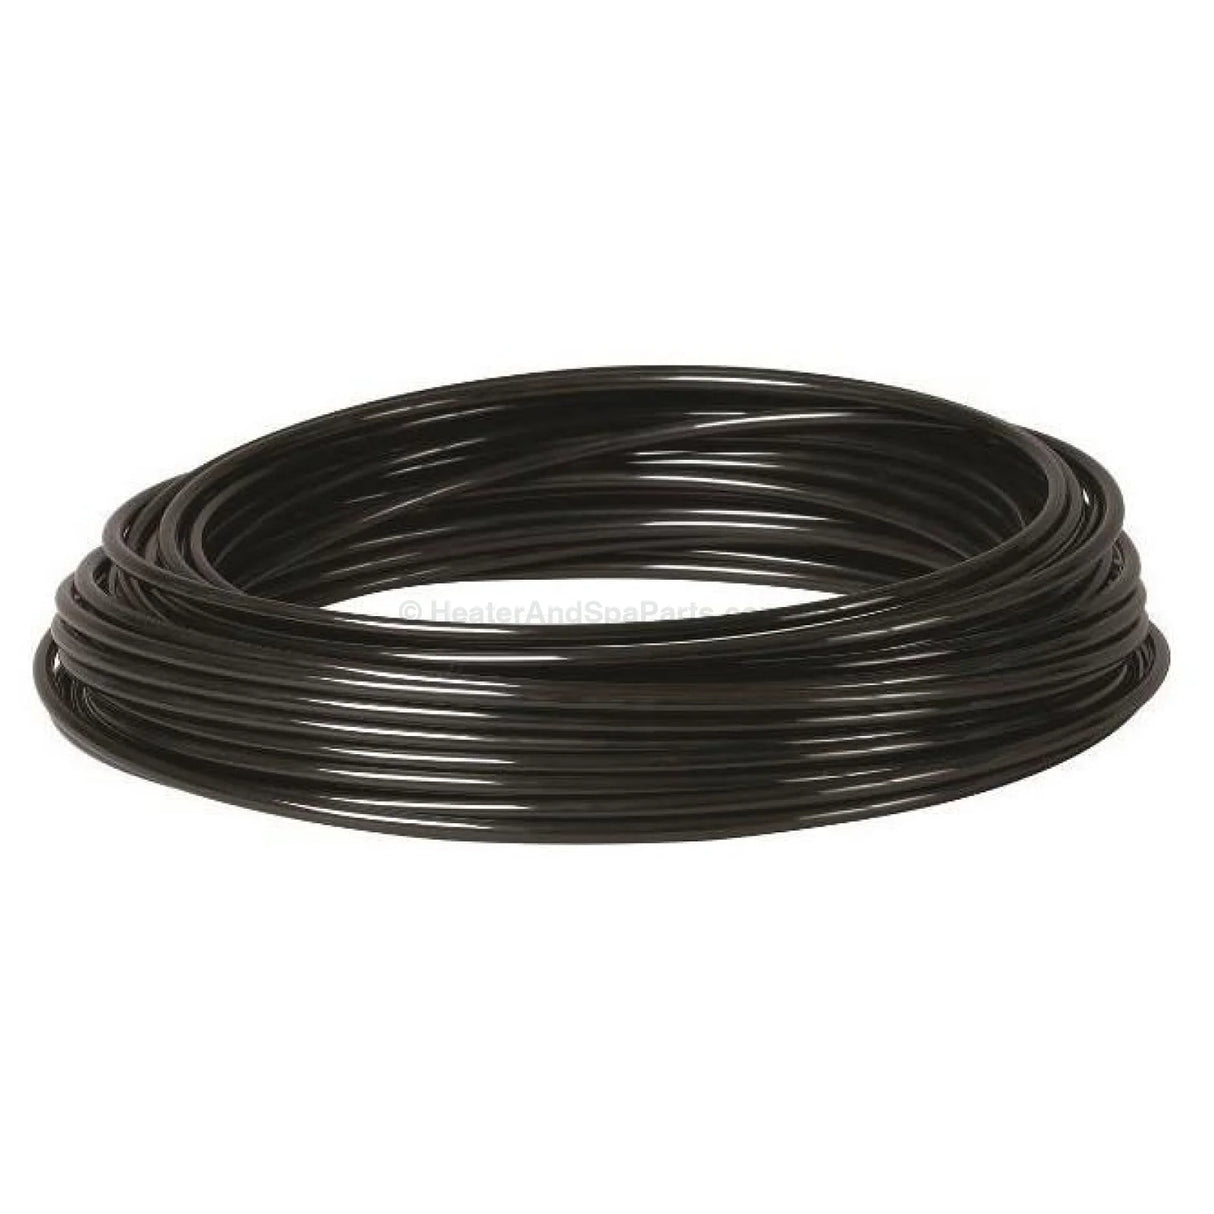 3-5mm Air Line Hose / Tube for Spa and Pool Air Switch Controls - Heater and Spa Parts